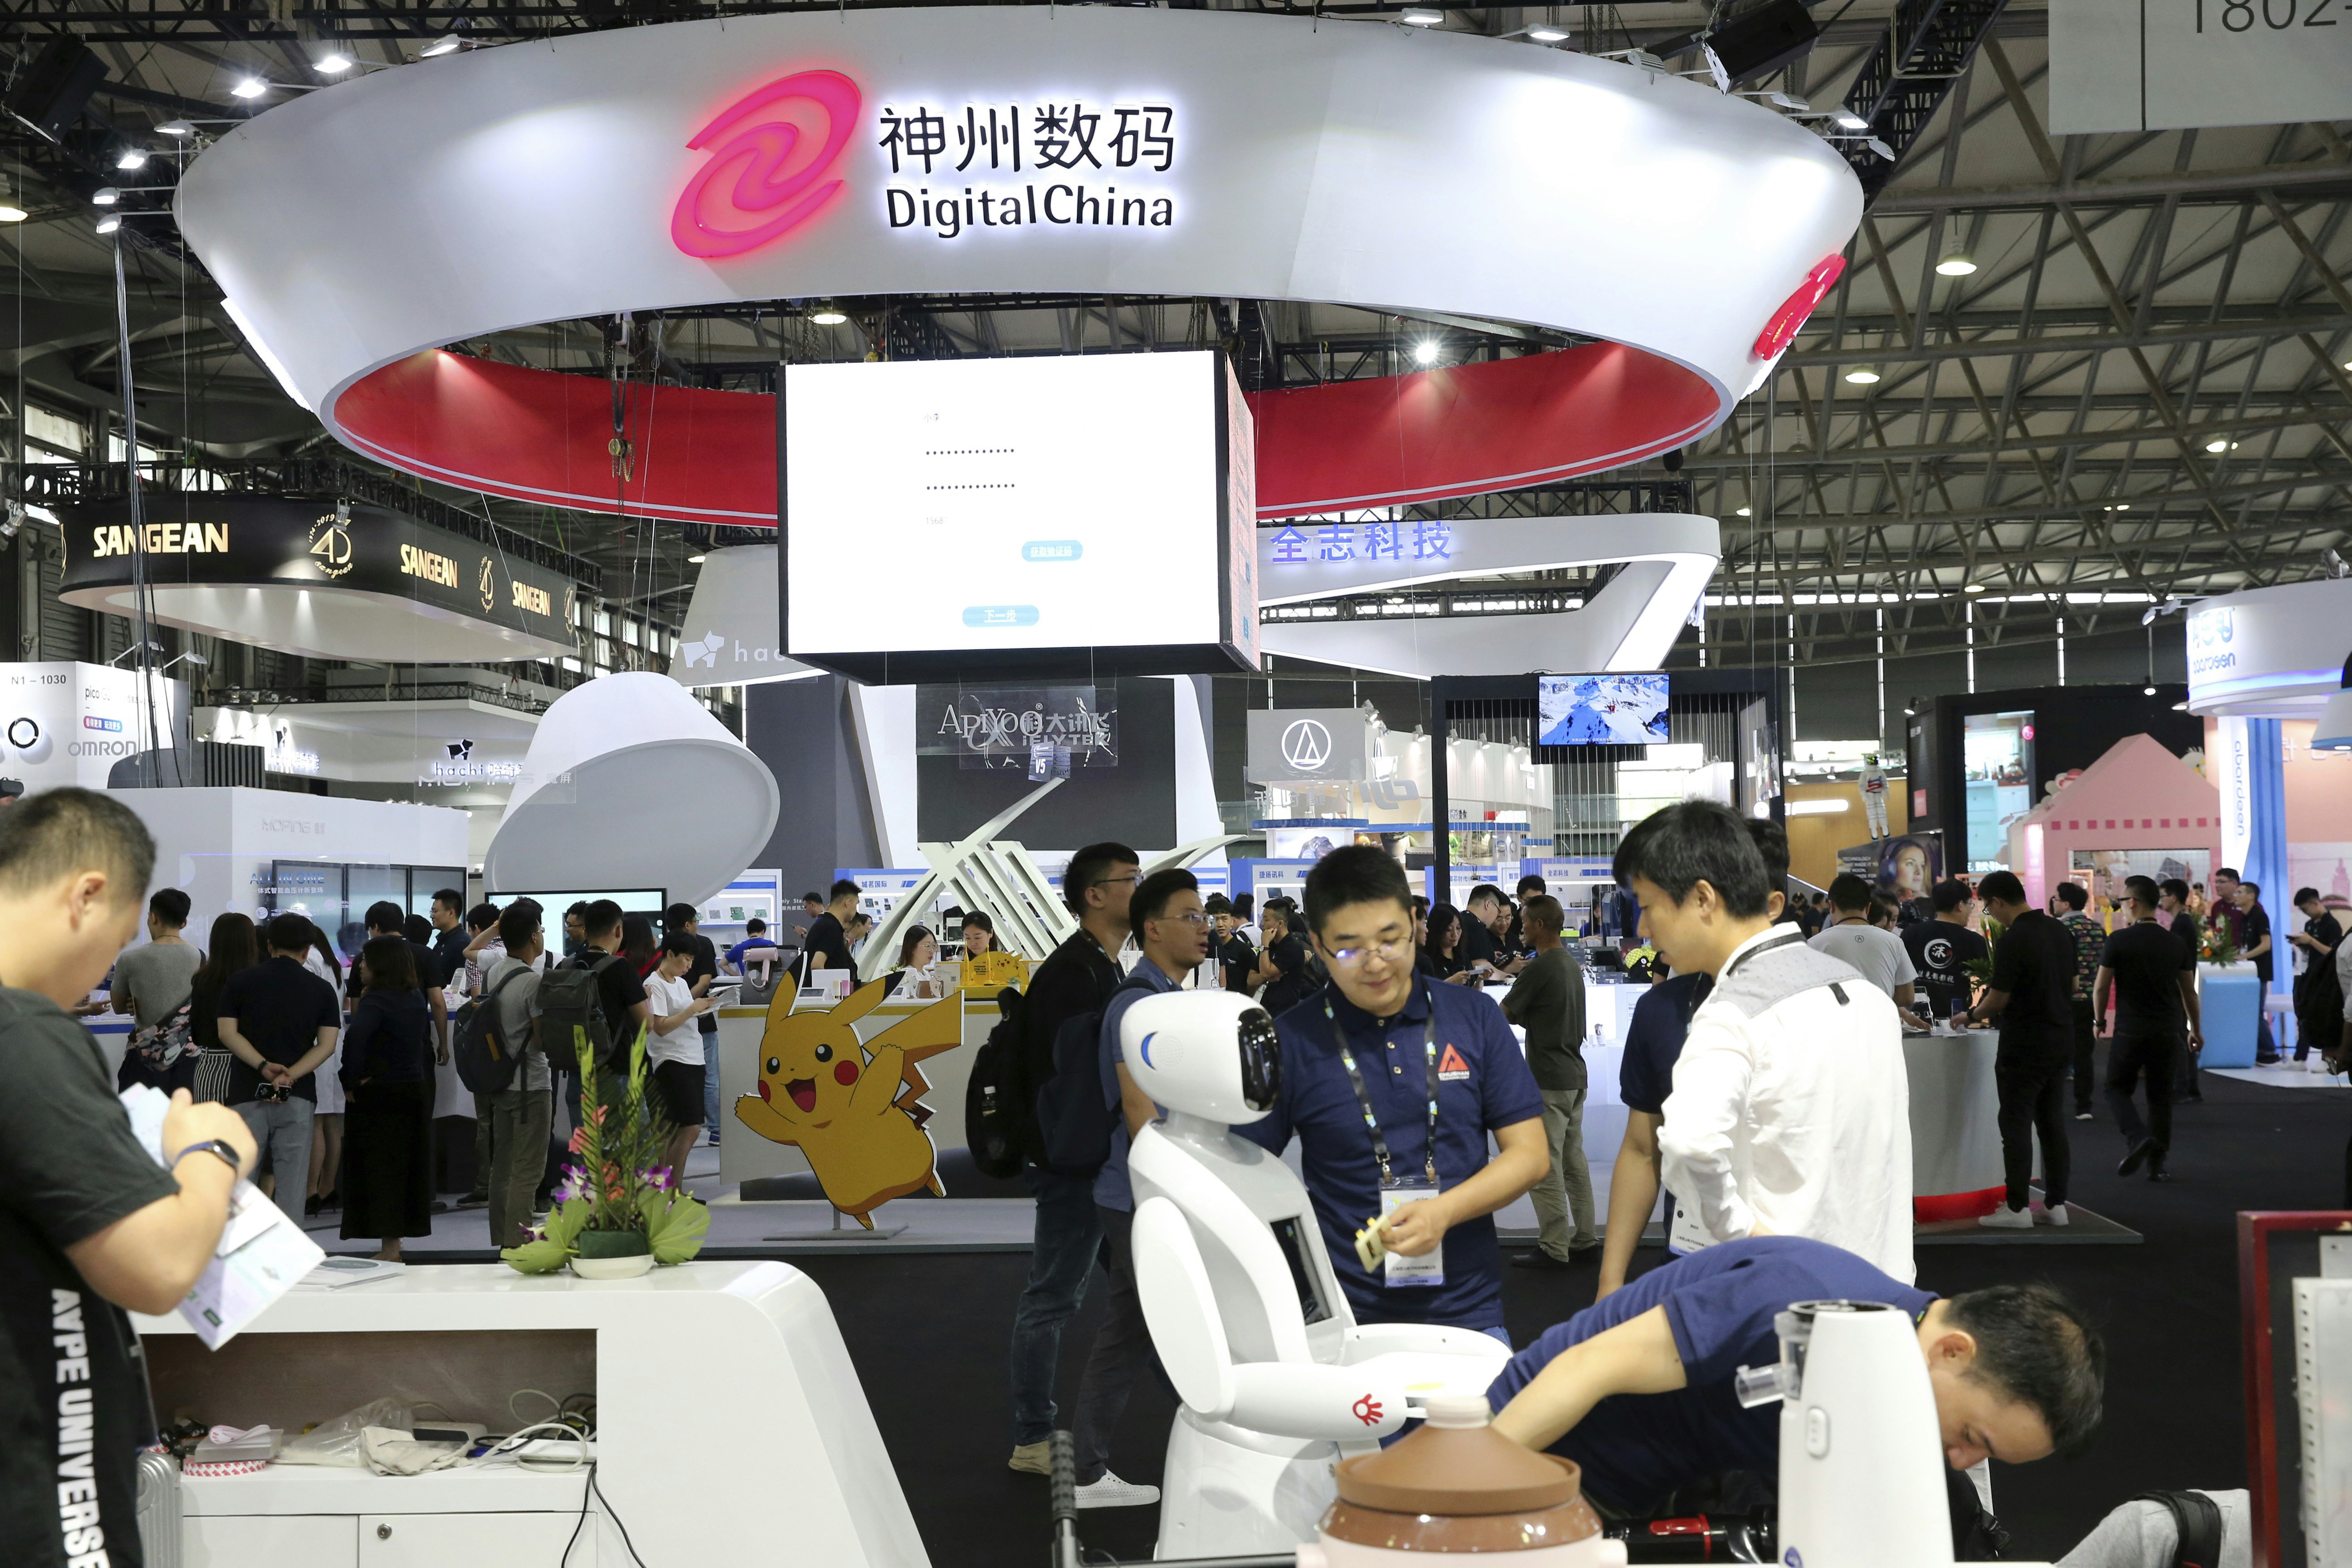 People visit the stand of Digital China during the 2019 International Consumer Electronics Show Asia in Shanghai, China, on June 11, 2019.